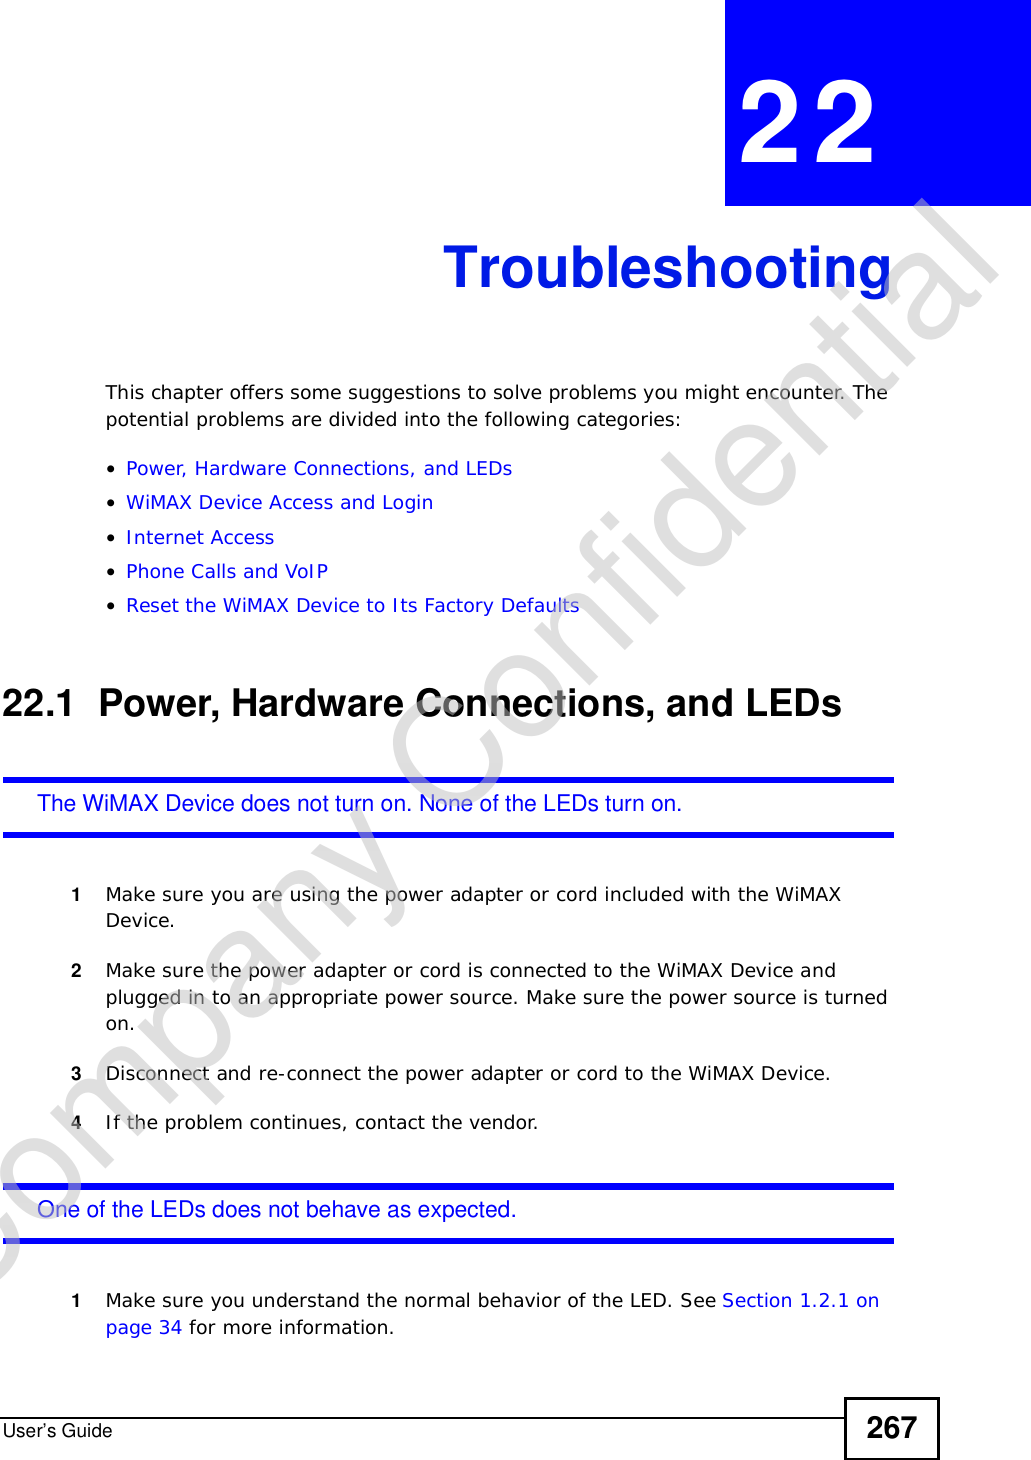 User’s Guide 267CHAPTER 22TroubleshootingThis chapter offers some suggestions to solve problems you might encounter. The potential problems are divided into the following categories:•Power, Hardware Connections, and LEDs•WiMAX Device Access and Login•Internet Access•Phone Calls and VoIP•Reset the WiMAX Device to Its Factory Defaults22.1  Power, Hardware Connections, and LEDsThe WiMAX Device does not turn on. None of the LEDs turn on.1Make sure you are using the power adapter or cord included with the WiMAX Device.2Make sure the power adapter or cord is connected to the WiMAX Device and plugged in to an appropriate power source. Make sure the power source is turned on.3Disconnect and re-connect the power adapter or cord to the WiMAX Device.4If the problem continues, contact the vendor.One of the LEDs does not behave as expected.1Make sure you understand the normal behavior of the LED. See Section 1.2.1 on page 34 for more information.Company Confidential